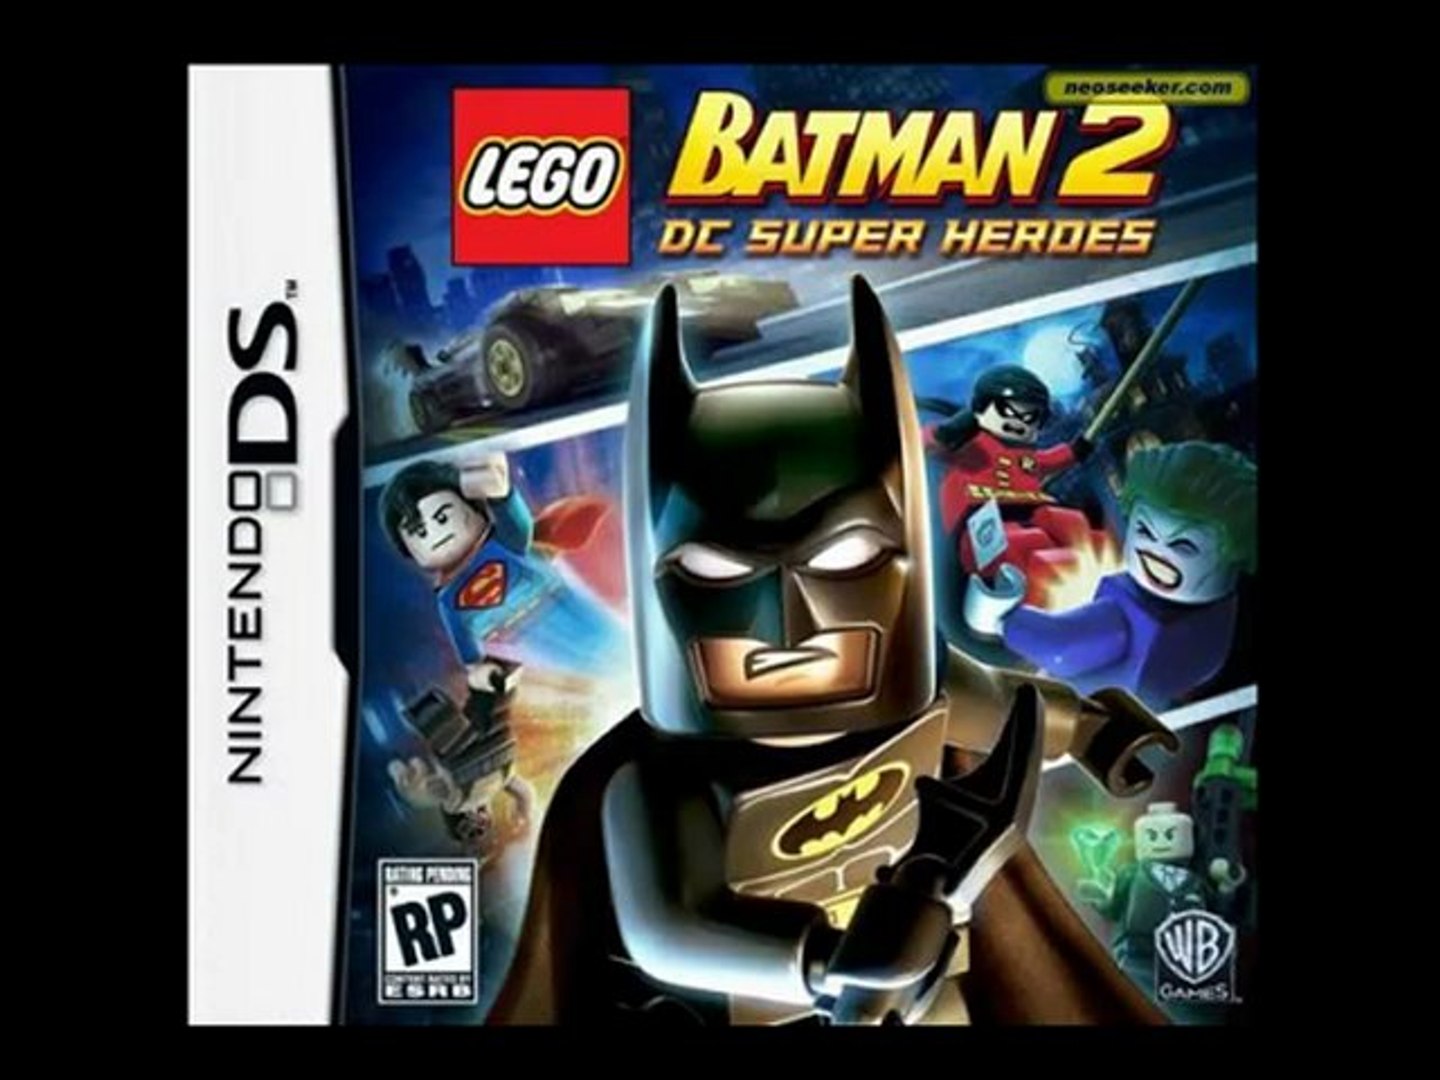 Working Lego Batman 2 DC Super Heroes (E) NDS DS ROM Download - video  Dailymotion